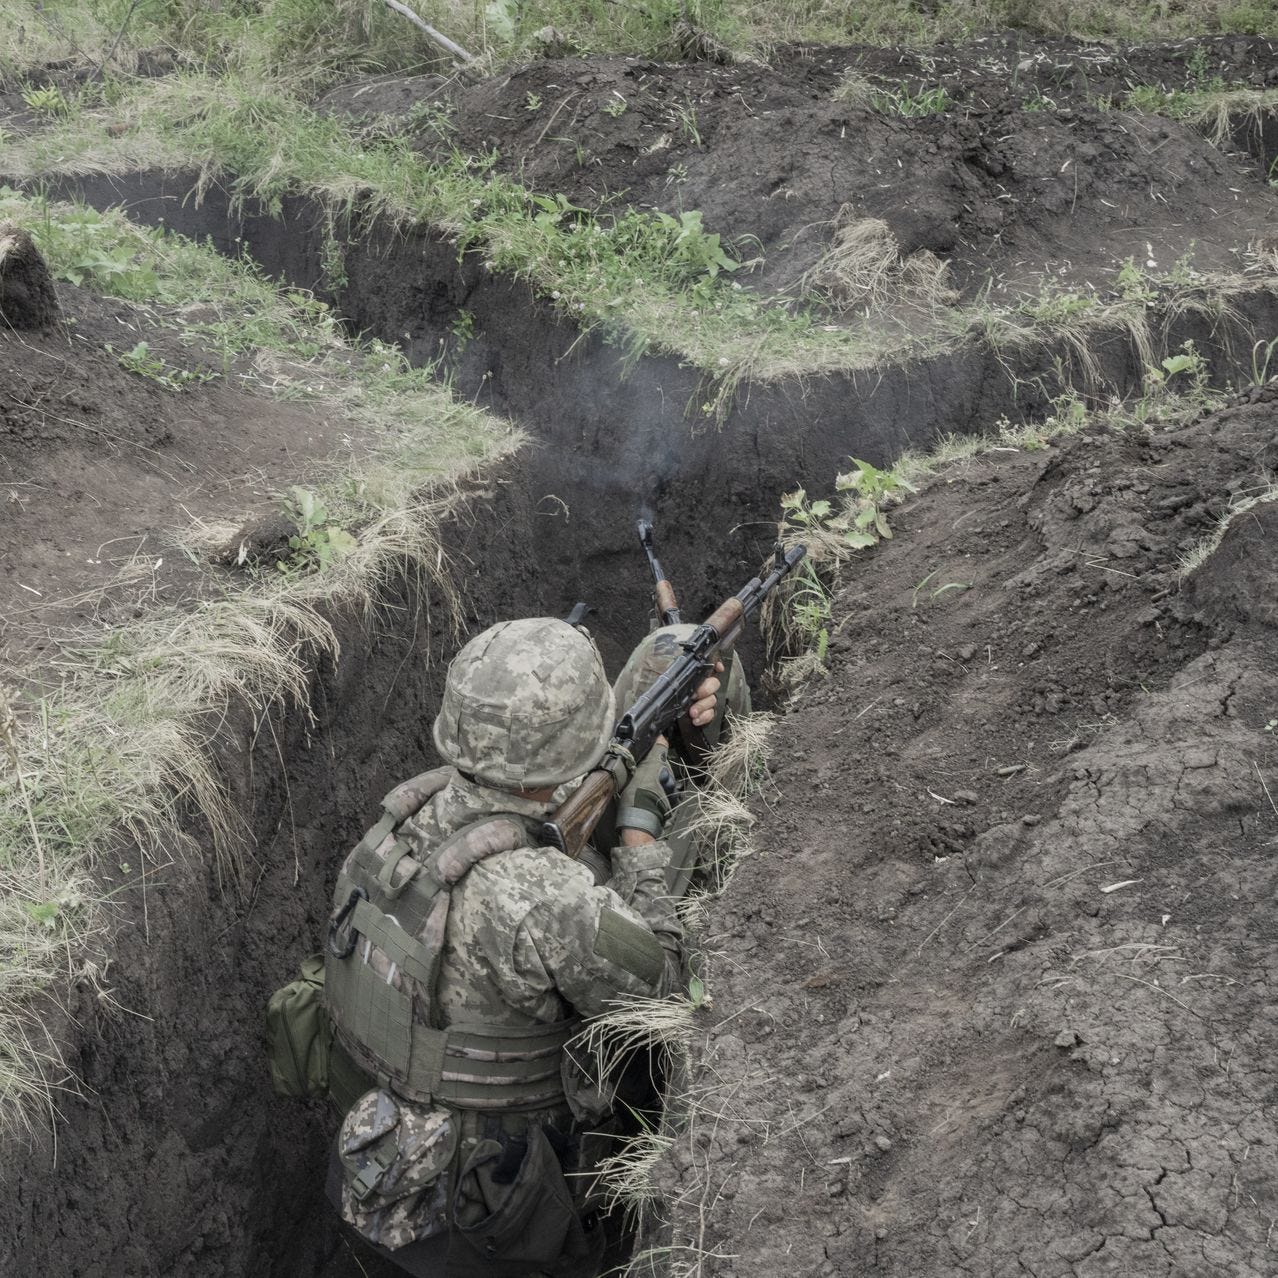 Ukrainian troops undergo training on trench warfare at a camp on the outskirts of Slovyansk.